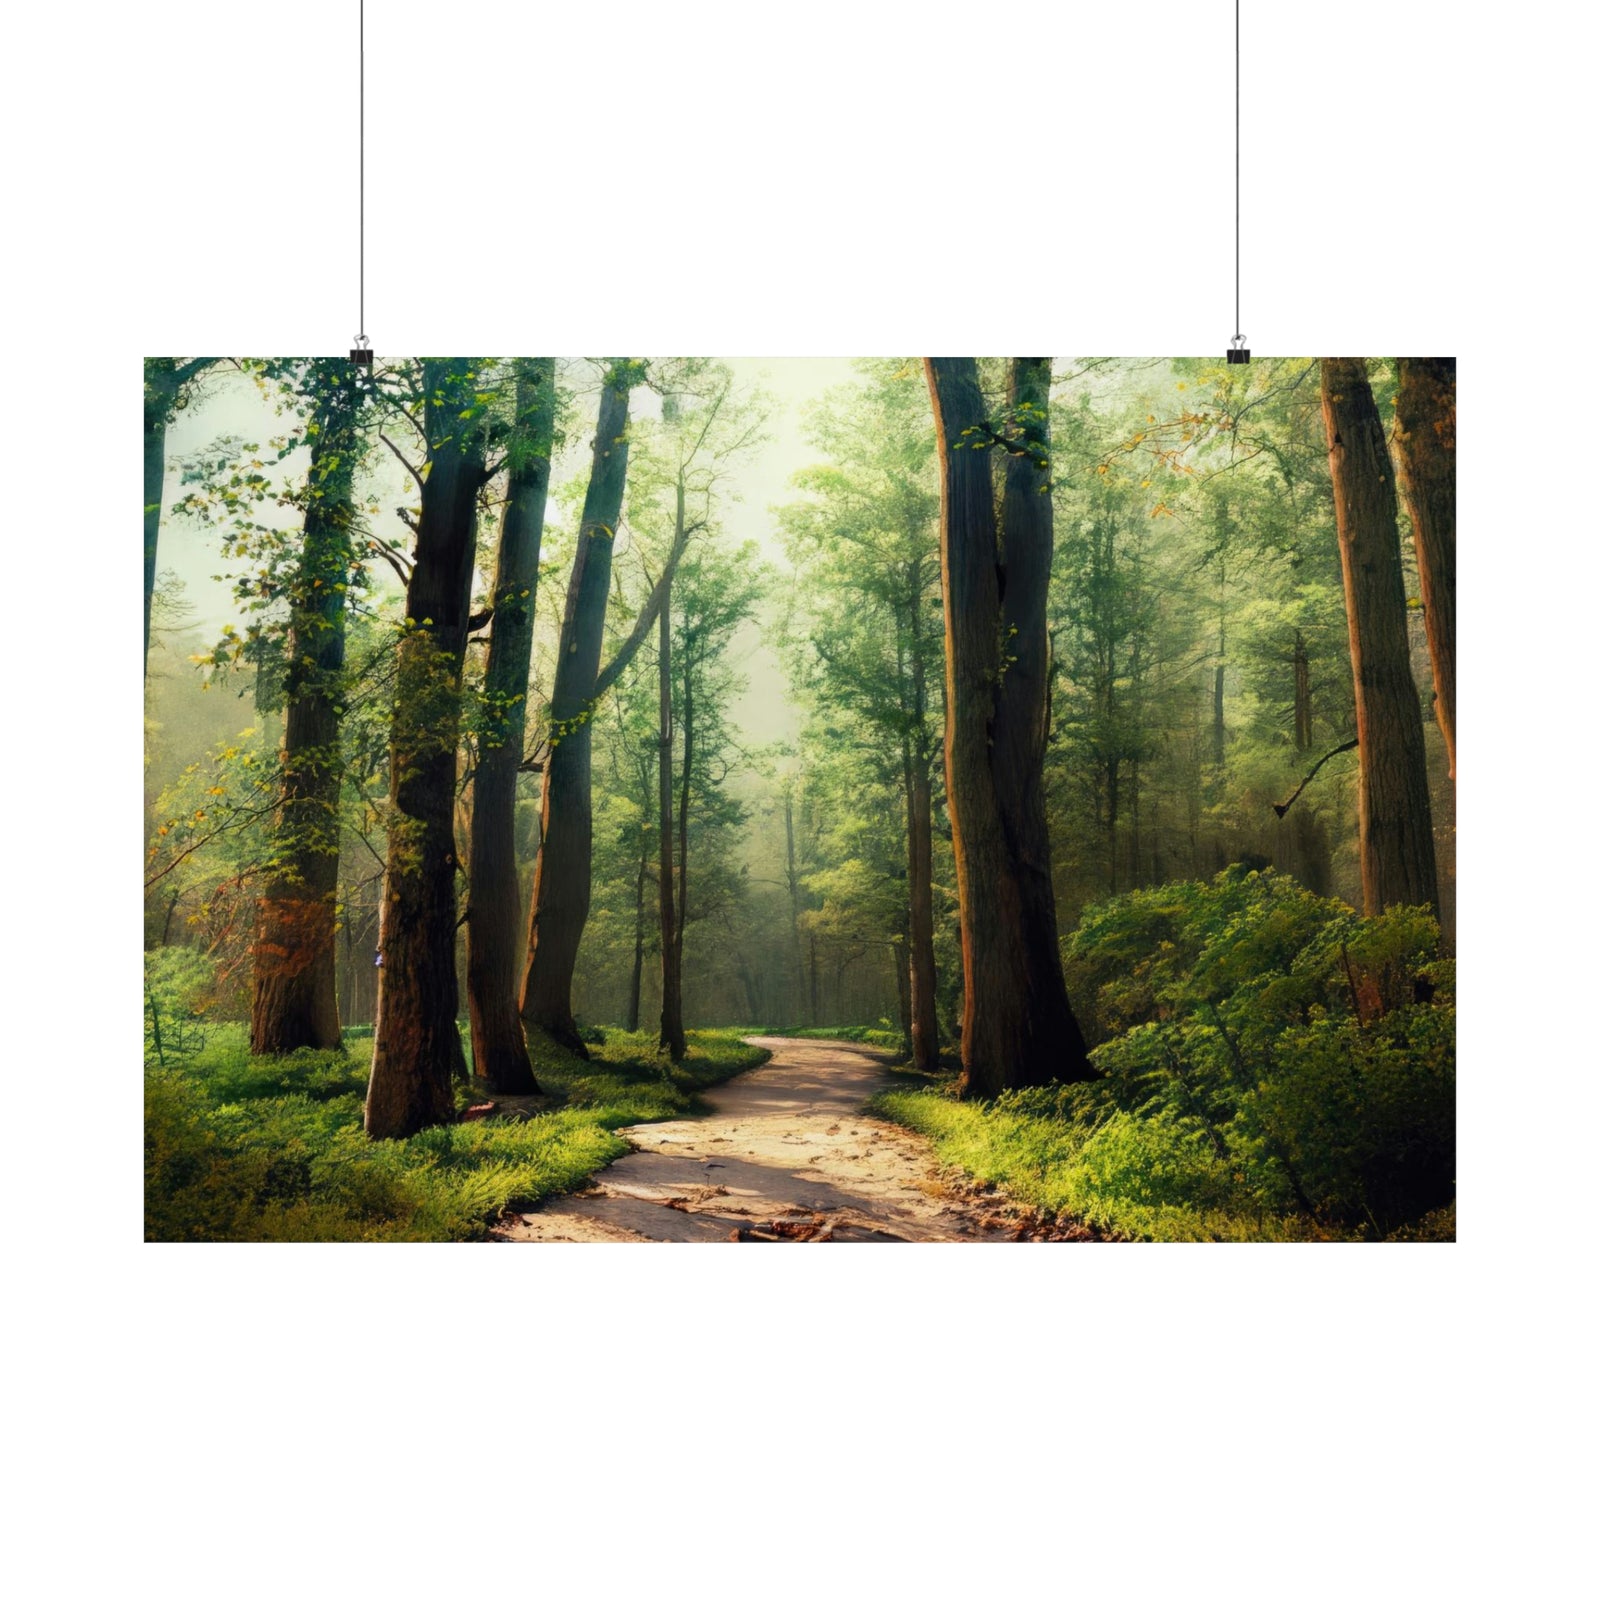 Wandering through the Woods Poster